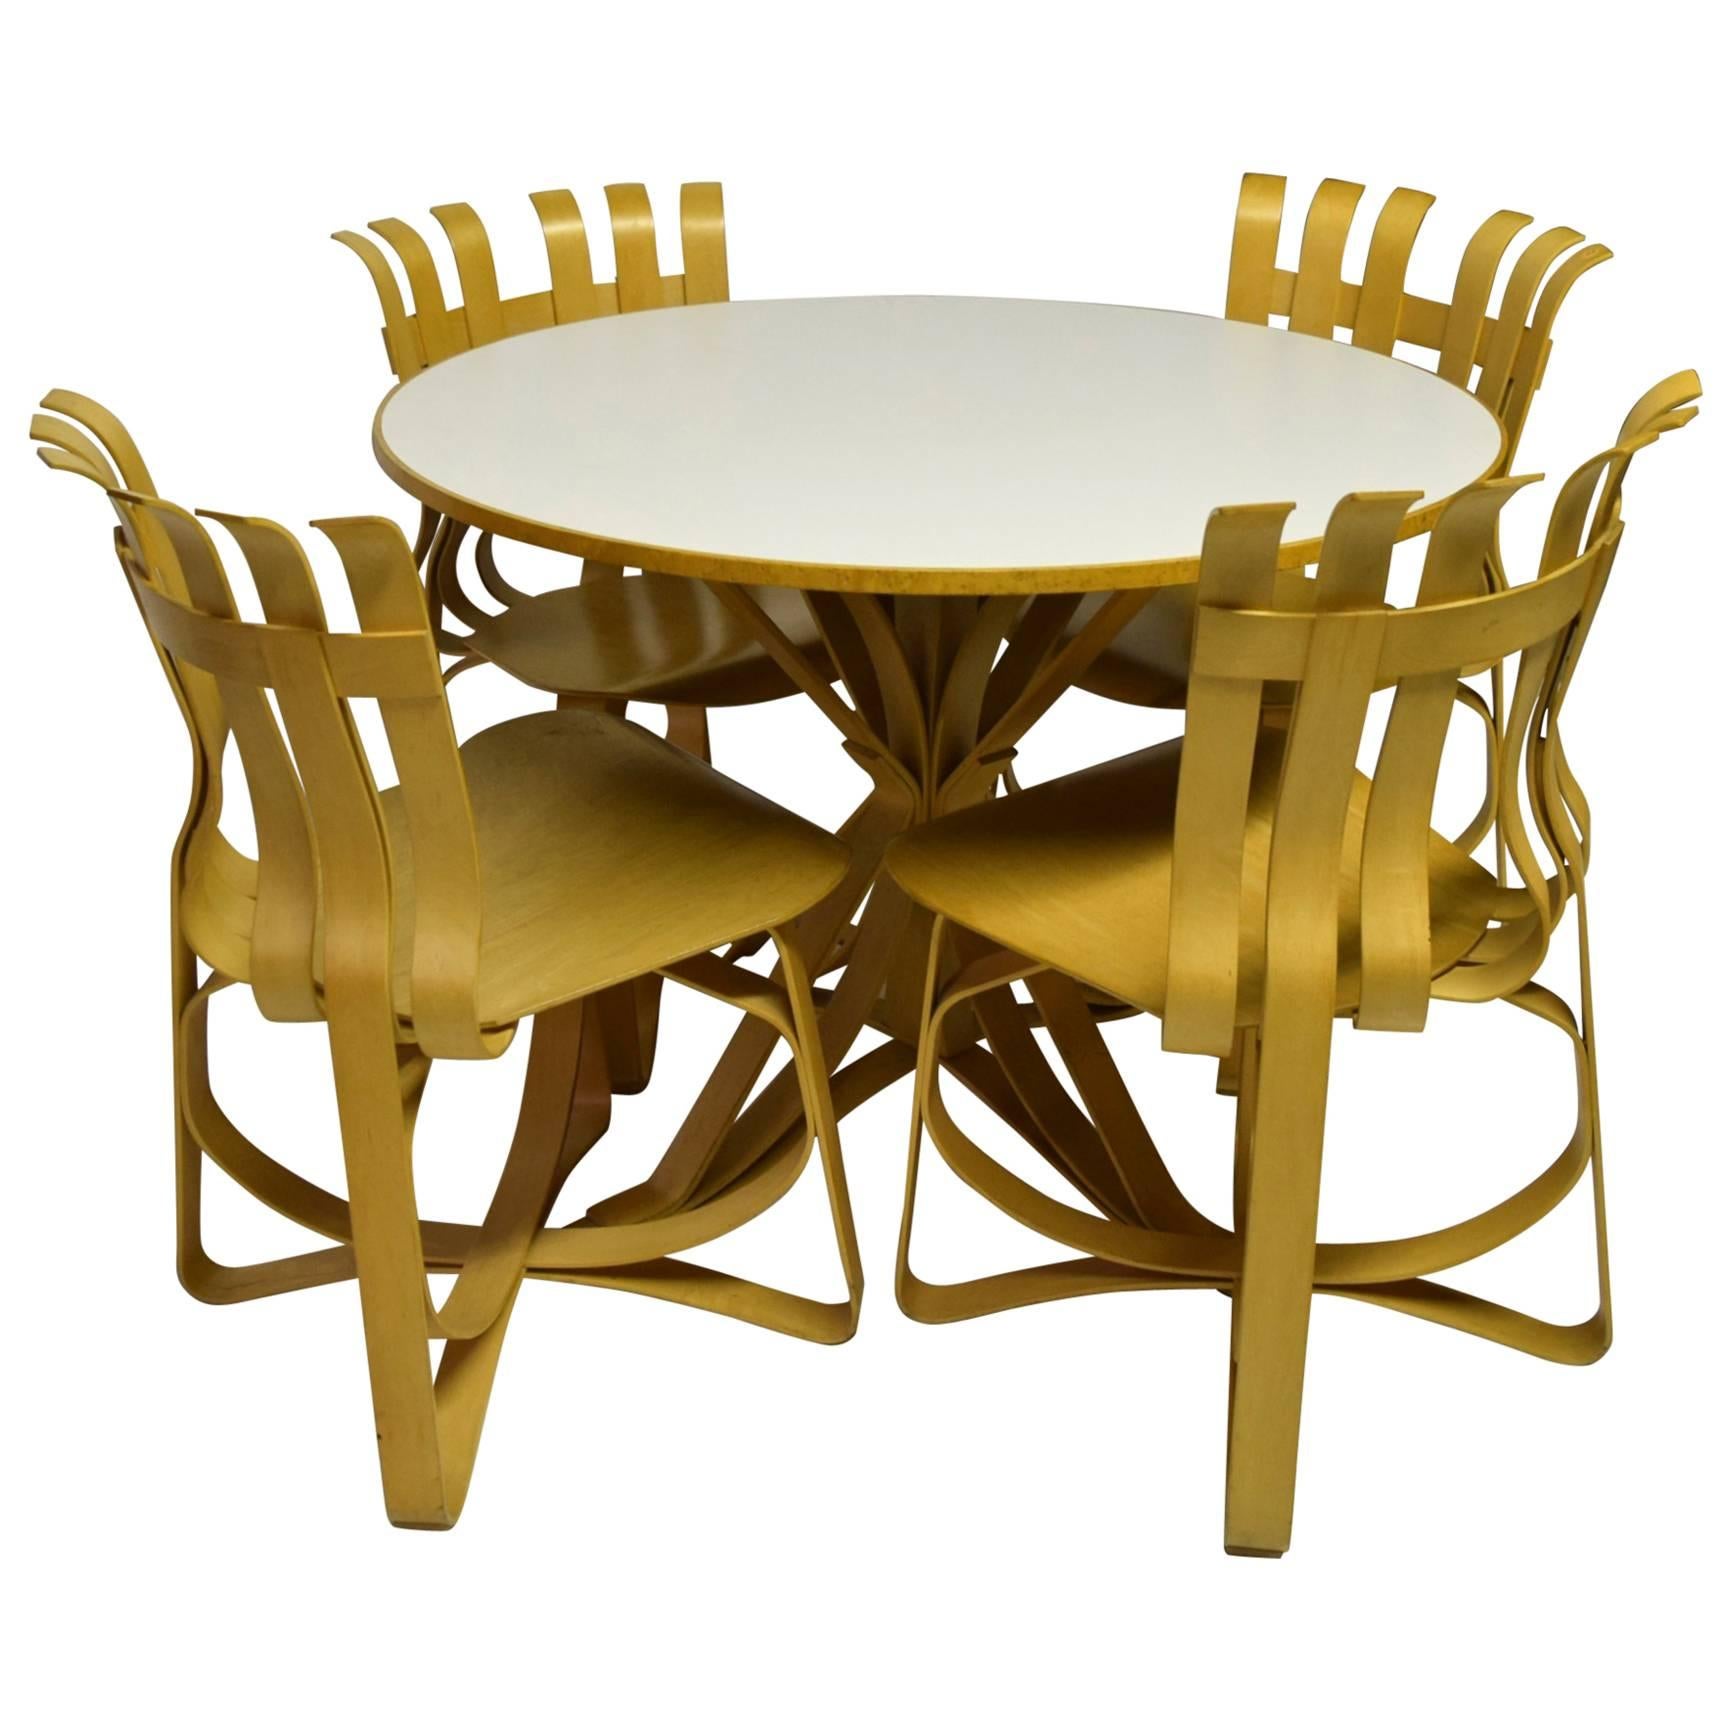 Dining Table and Four Chairs Designed by Frank Gehry for Knoll 1997, USA